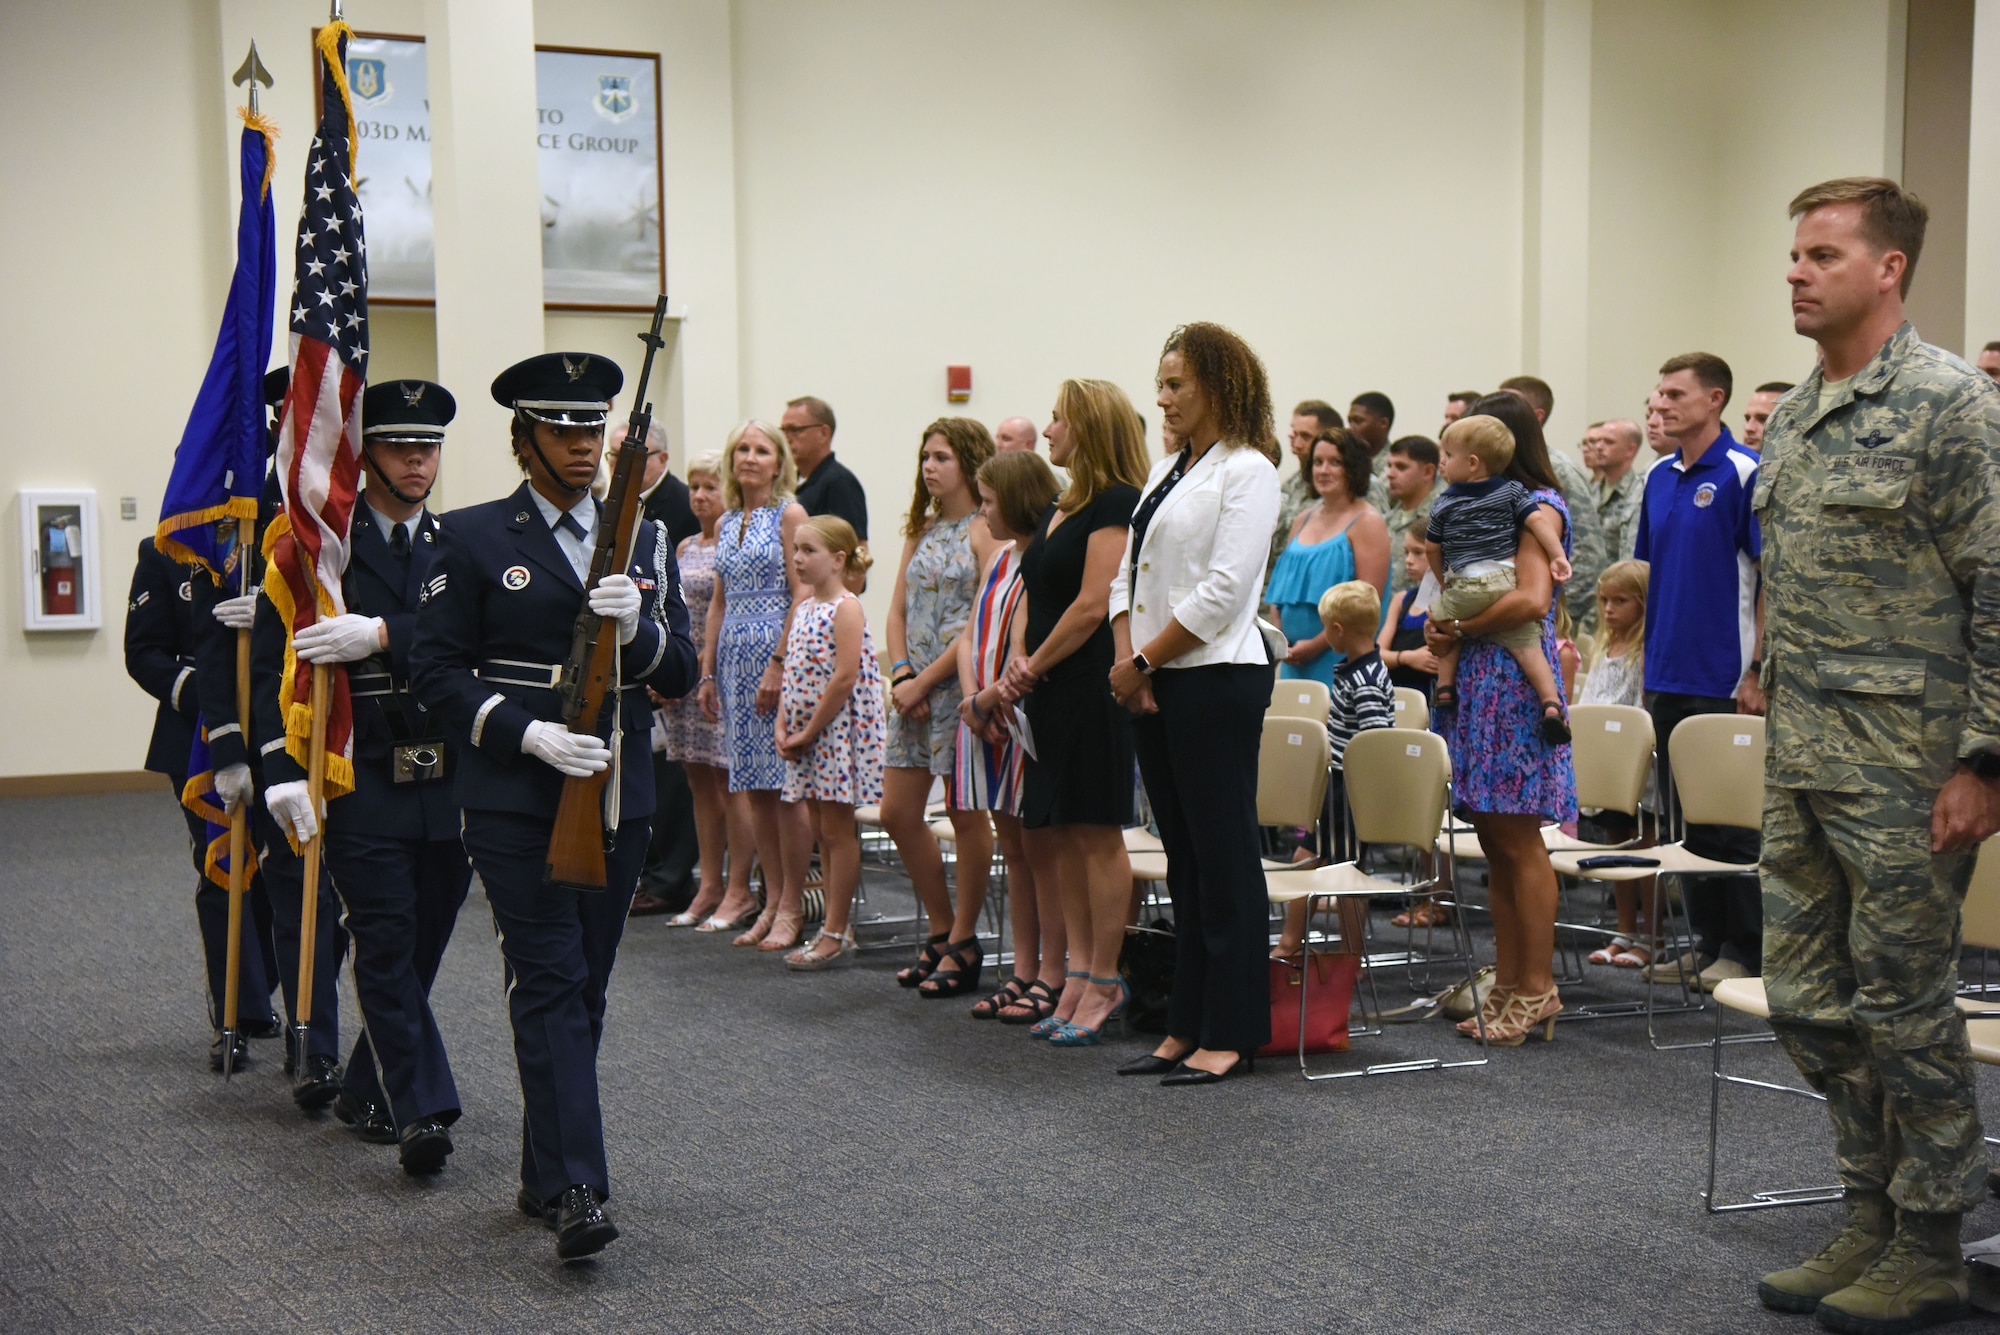 Members of the Keesler Honor Guard present the colors during the 333rd Training Squadron change of command ceremony in the Roberts Consolidated Aircraft Maintenance Facility at Keesler Air Force Base, Mississippi, July 24, 2018. U.S. Air Force Lt. Col. Andrew Miller, incoming 333rd TRS commander, assumed command from Lt. Col. Nathaniel Huston, outgoing 333rd TRS commander. (U.S. Air Force photo by Kemberly Groue)